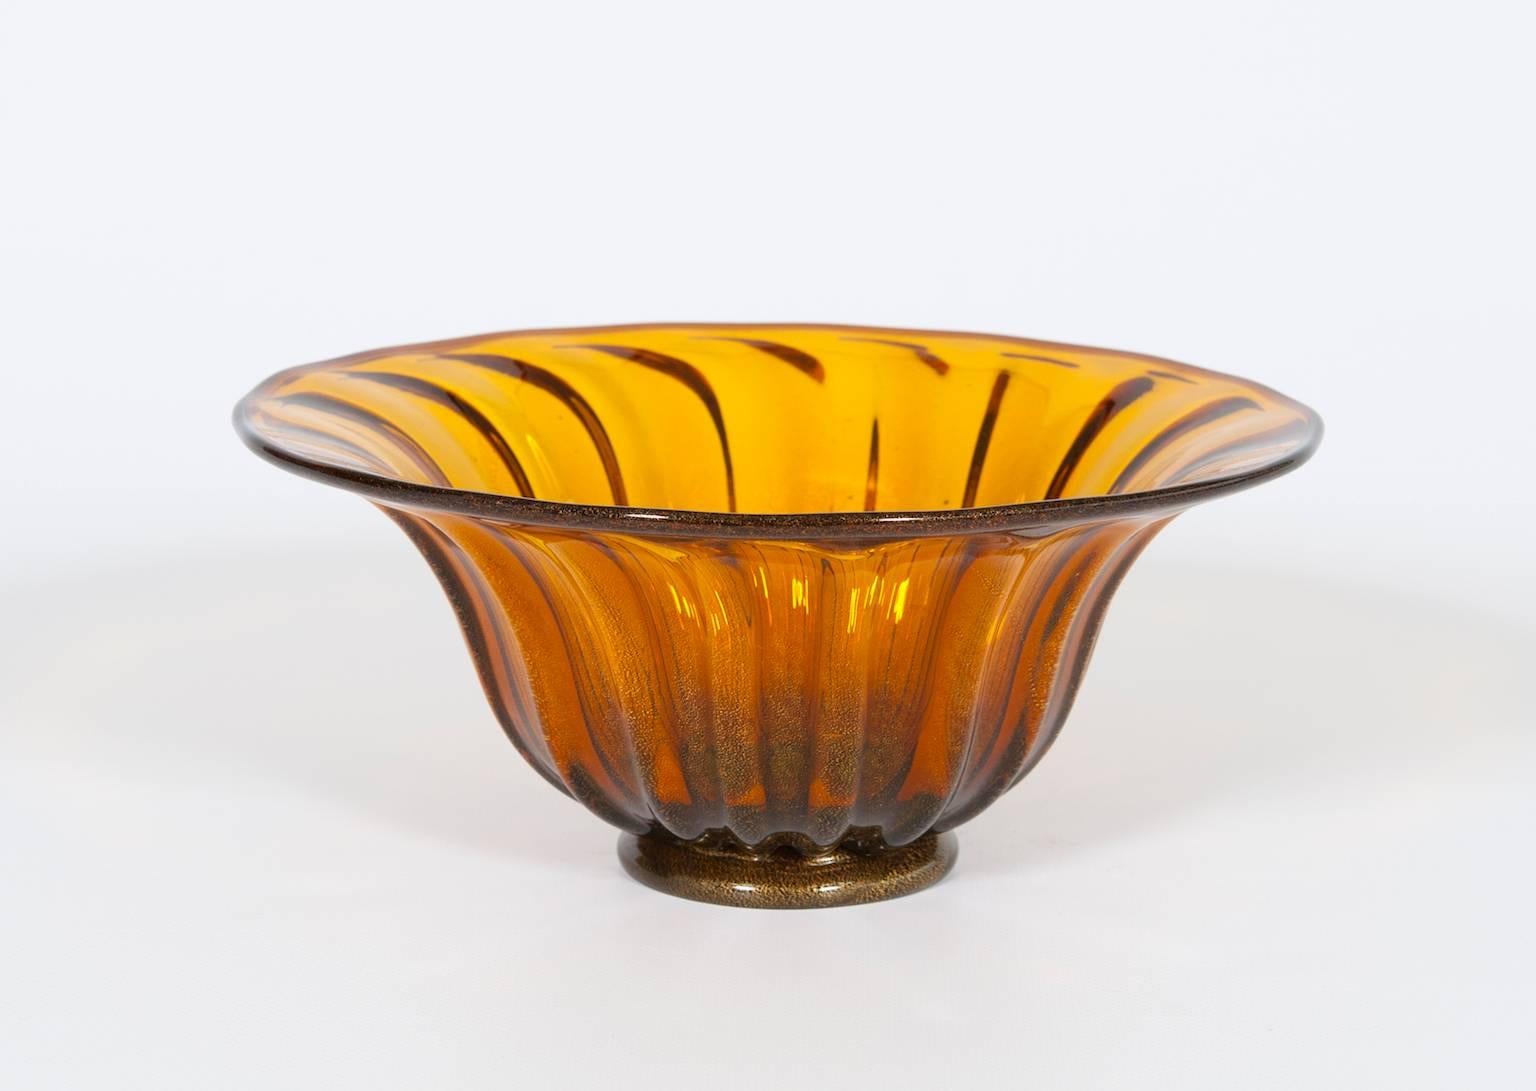 Elegant Italian Murano glass bowl in amber with gold rifiniture, in very excellent original condition, circa 1960s. The bowl measures: 4.72 inch high, by 10.63 inches diameter.